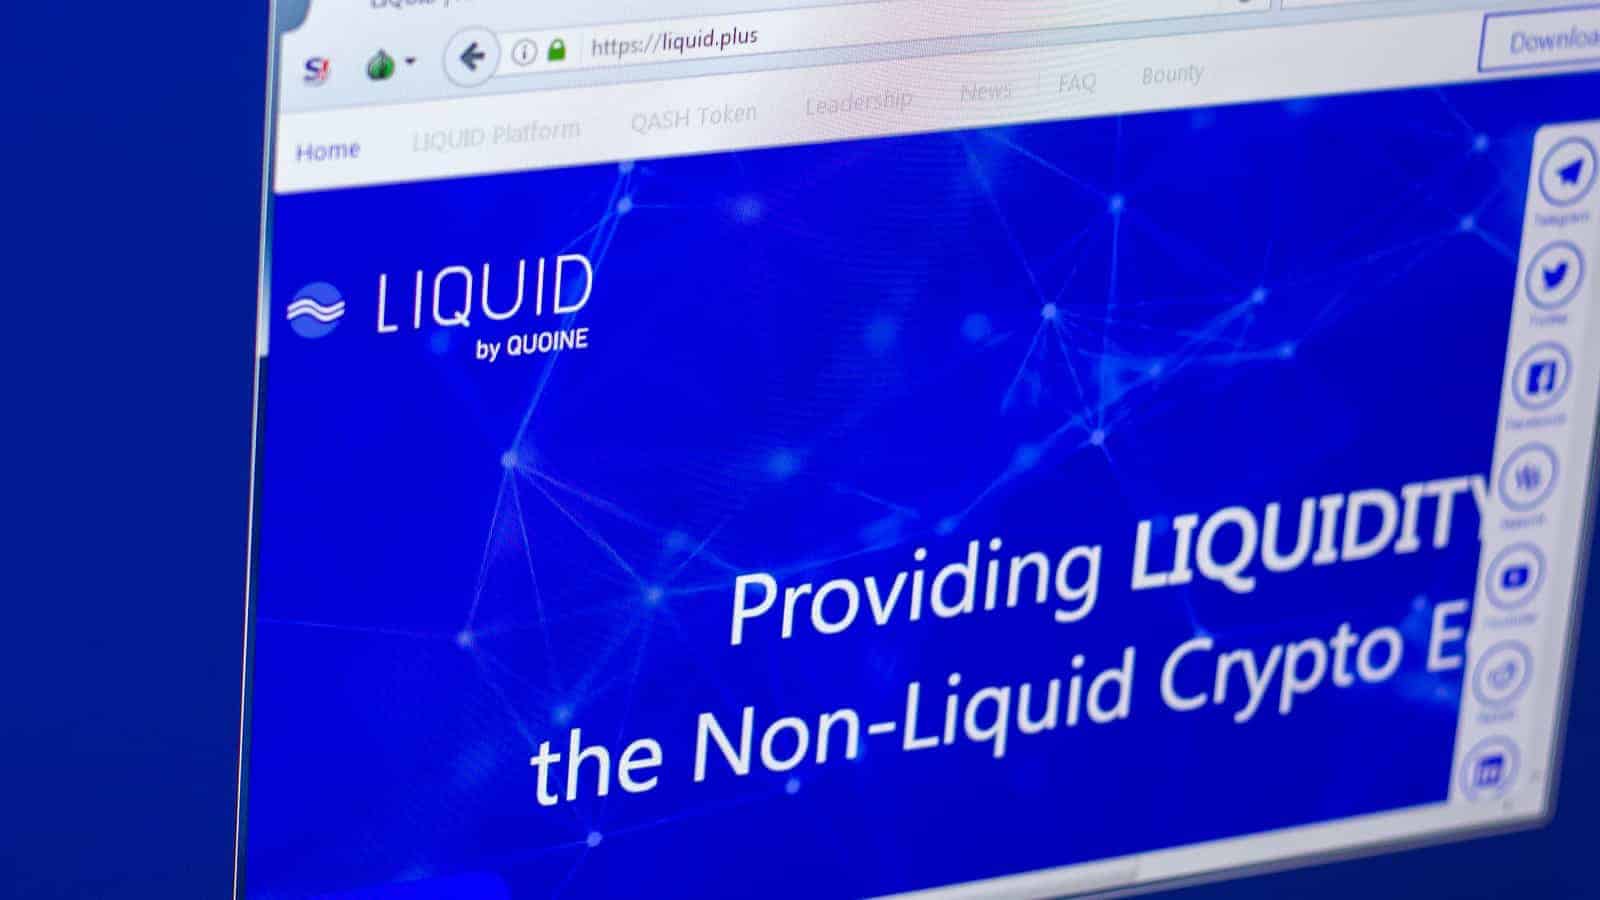 BCH and XRP To Start Margin Trading And Lending On Liquid